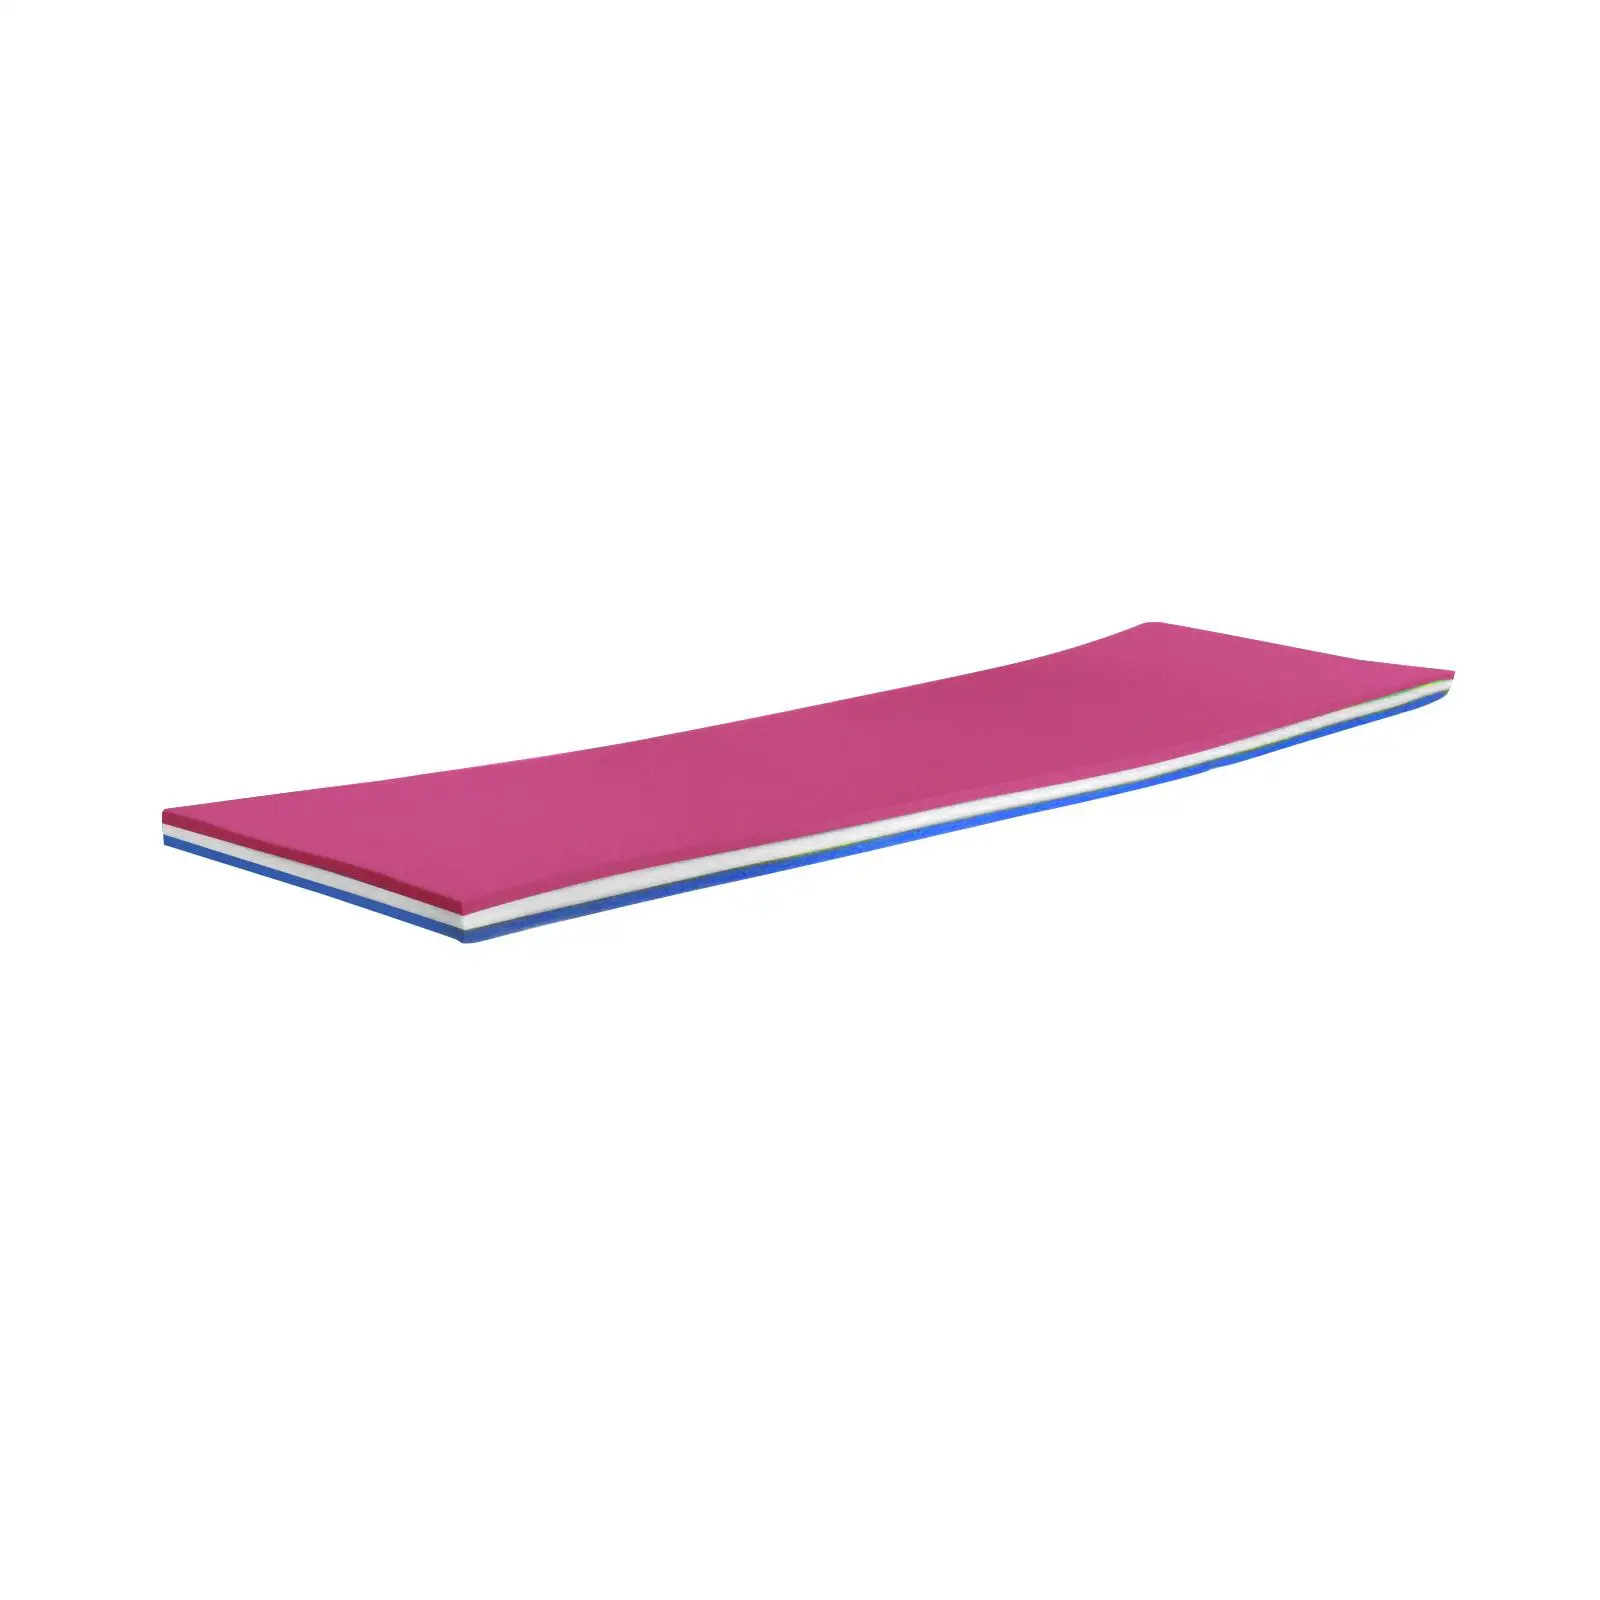 Pool Floating Water Mat 3 Layer Water Raft 110cmx40x3.2cm Smooth Surface Durable for Kids, Teens Water Bed Pink White Blue